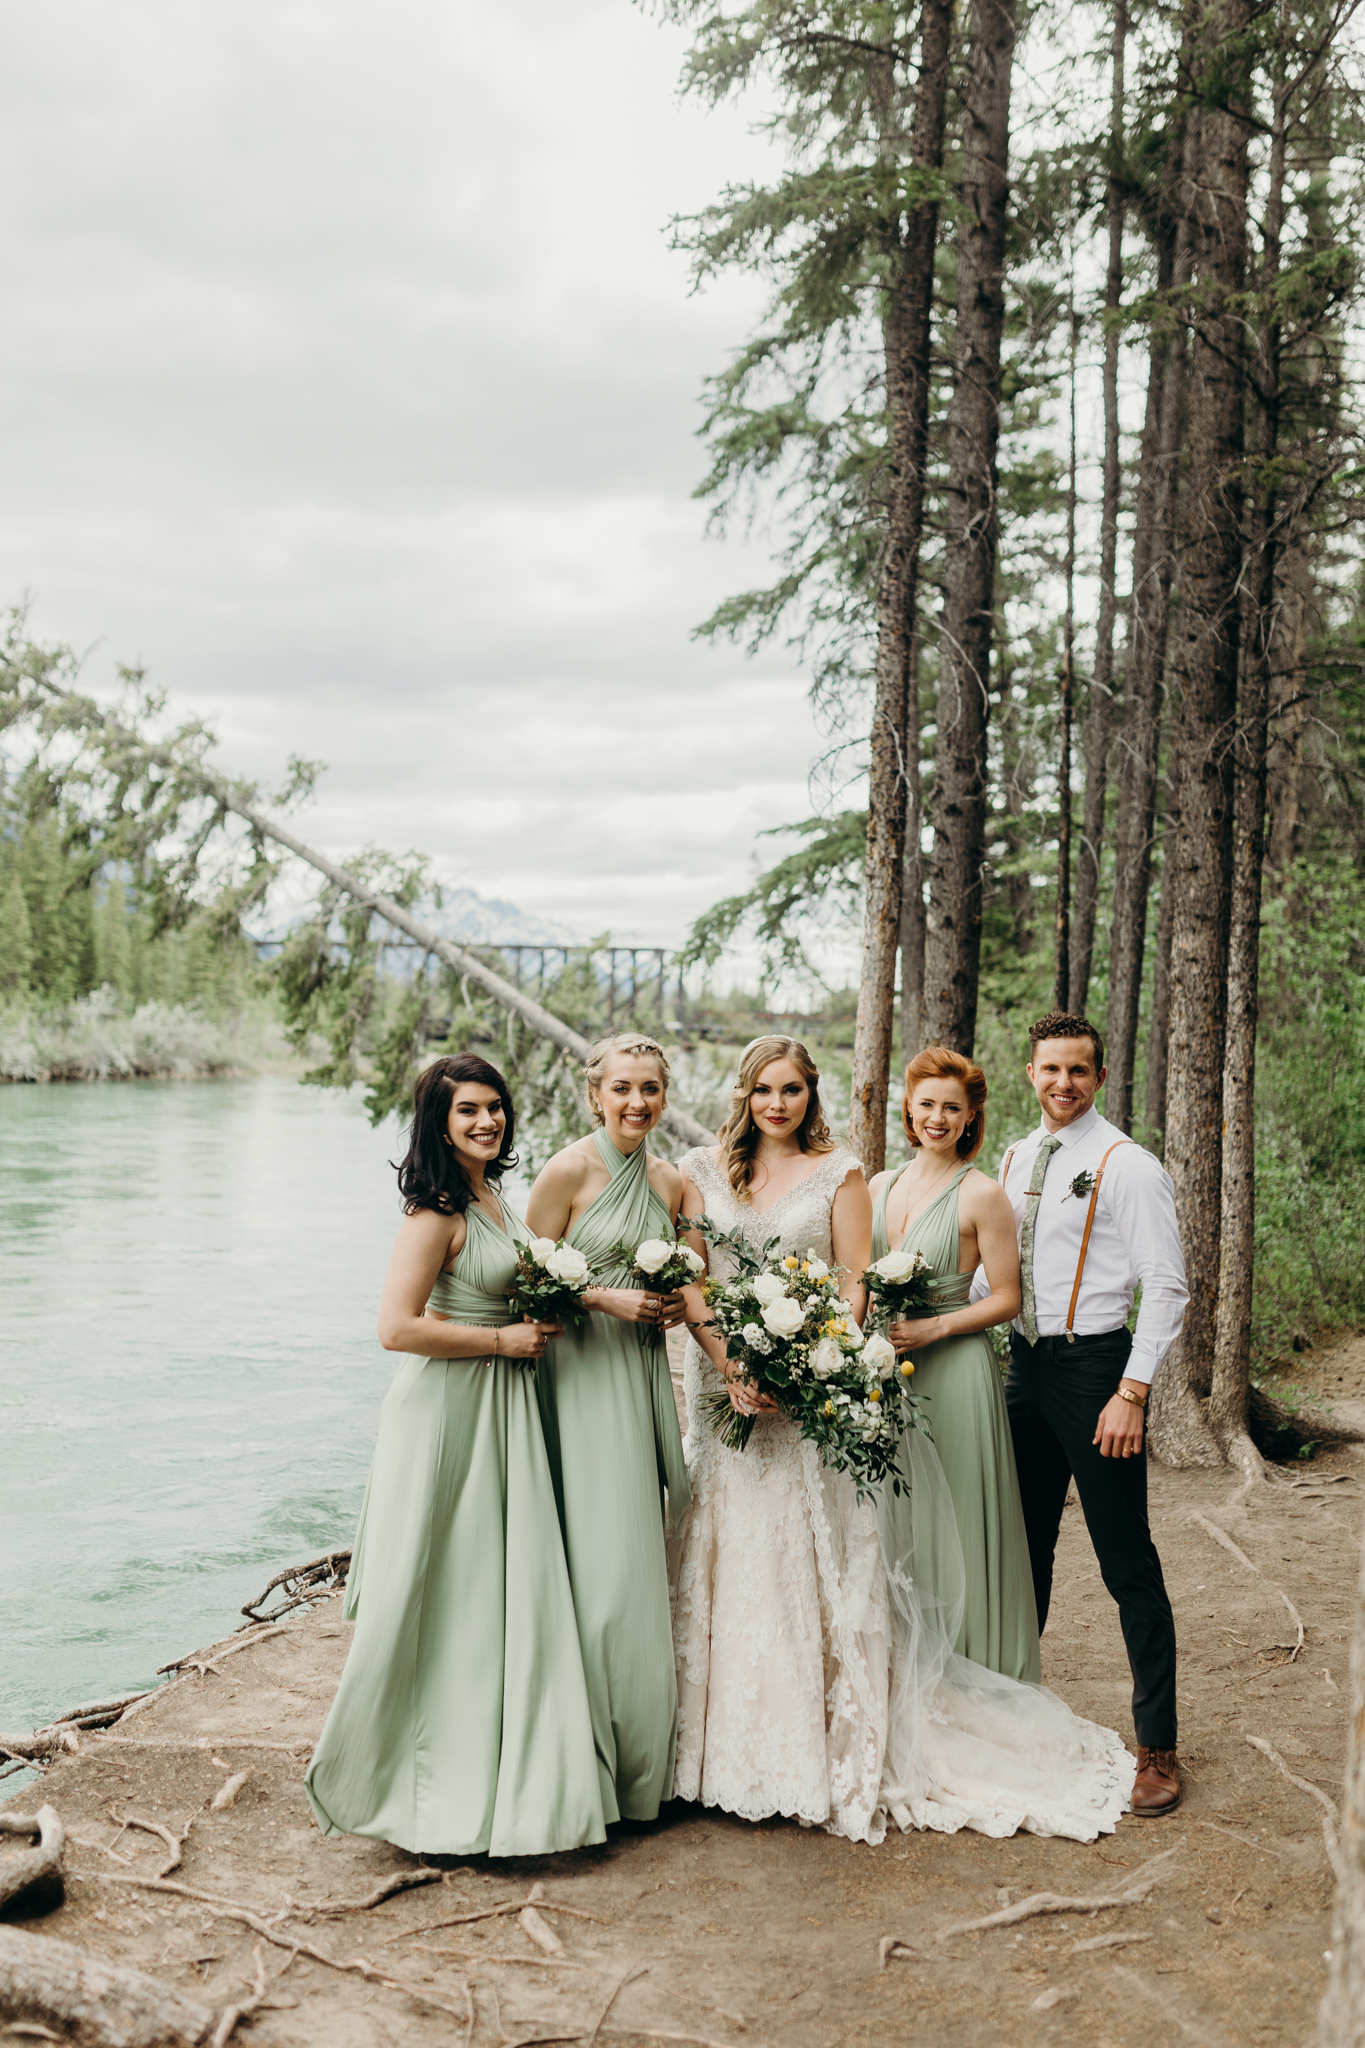 Brides and bridesmaids portrait at Bow River Canmore destination wedding